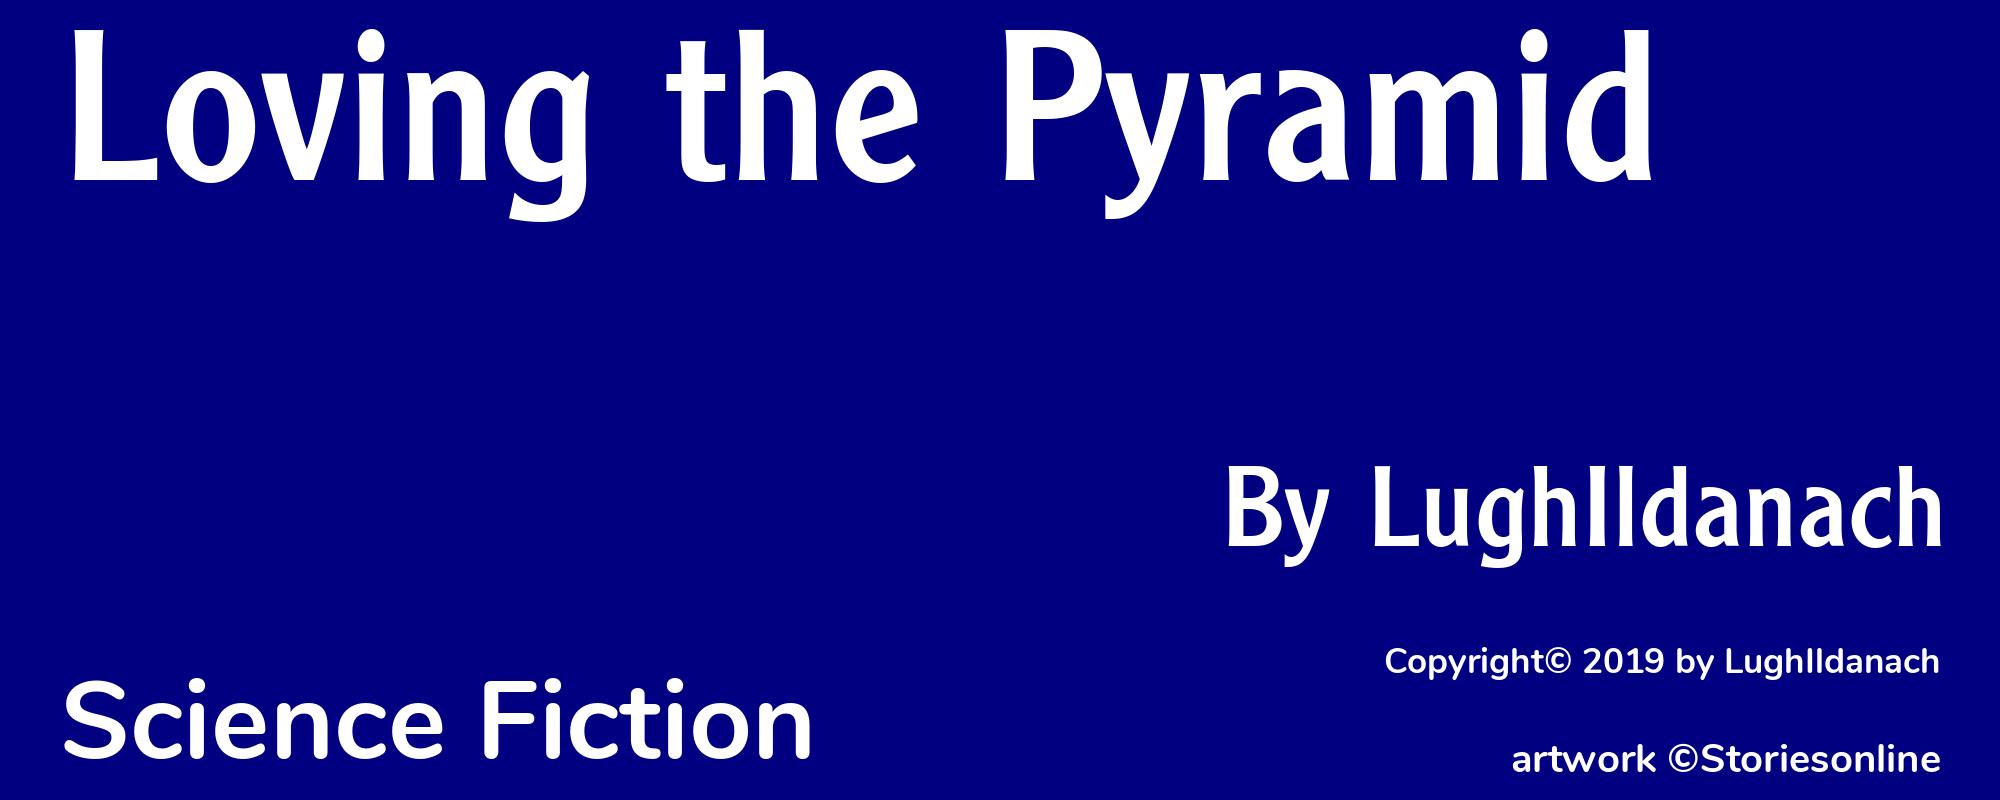 Loving the Pyramid - Cover